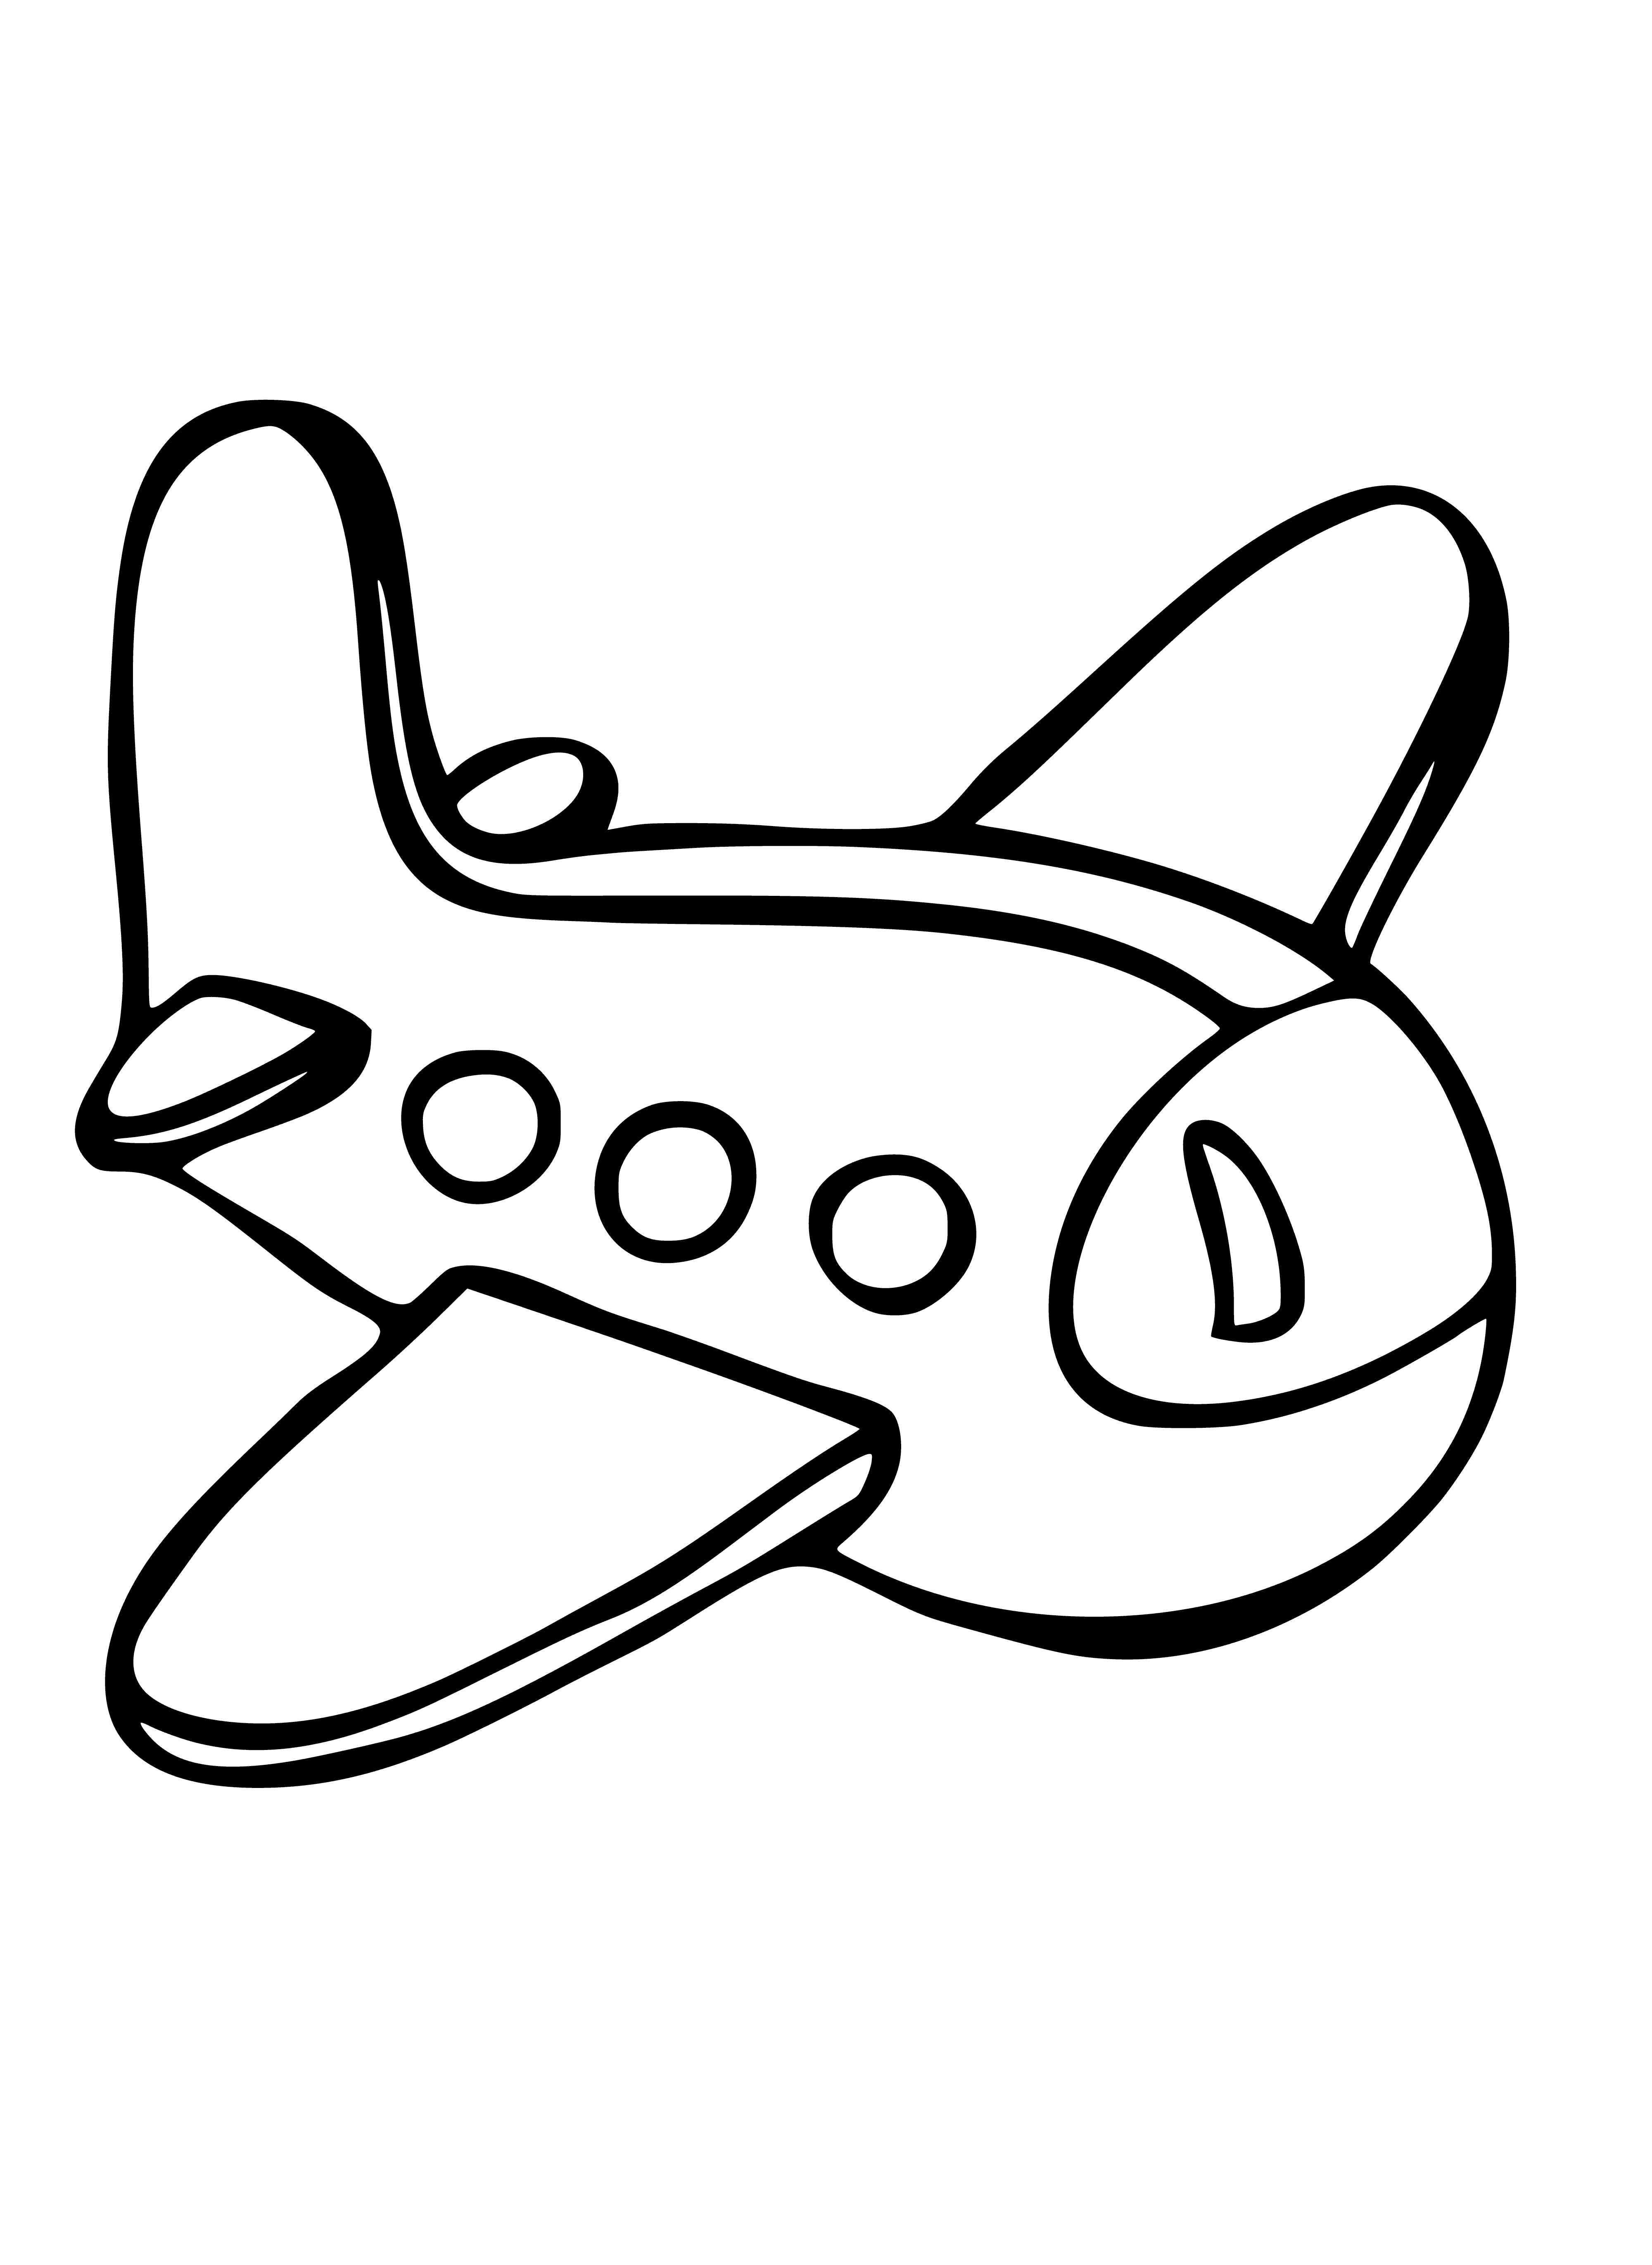 coloring page: An airplane with yellow body and blue wings, with two people in it- pilot wearing blue and passenger wearing red. #aviation